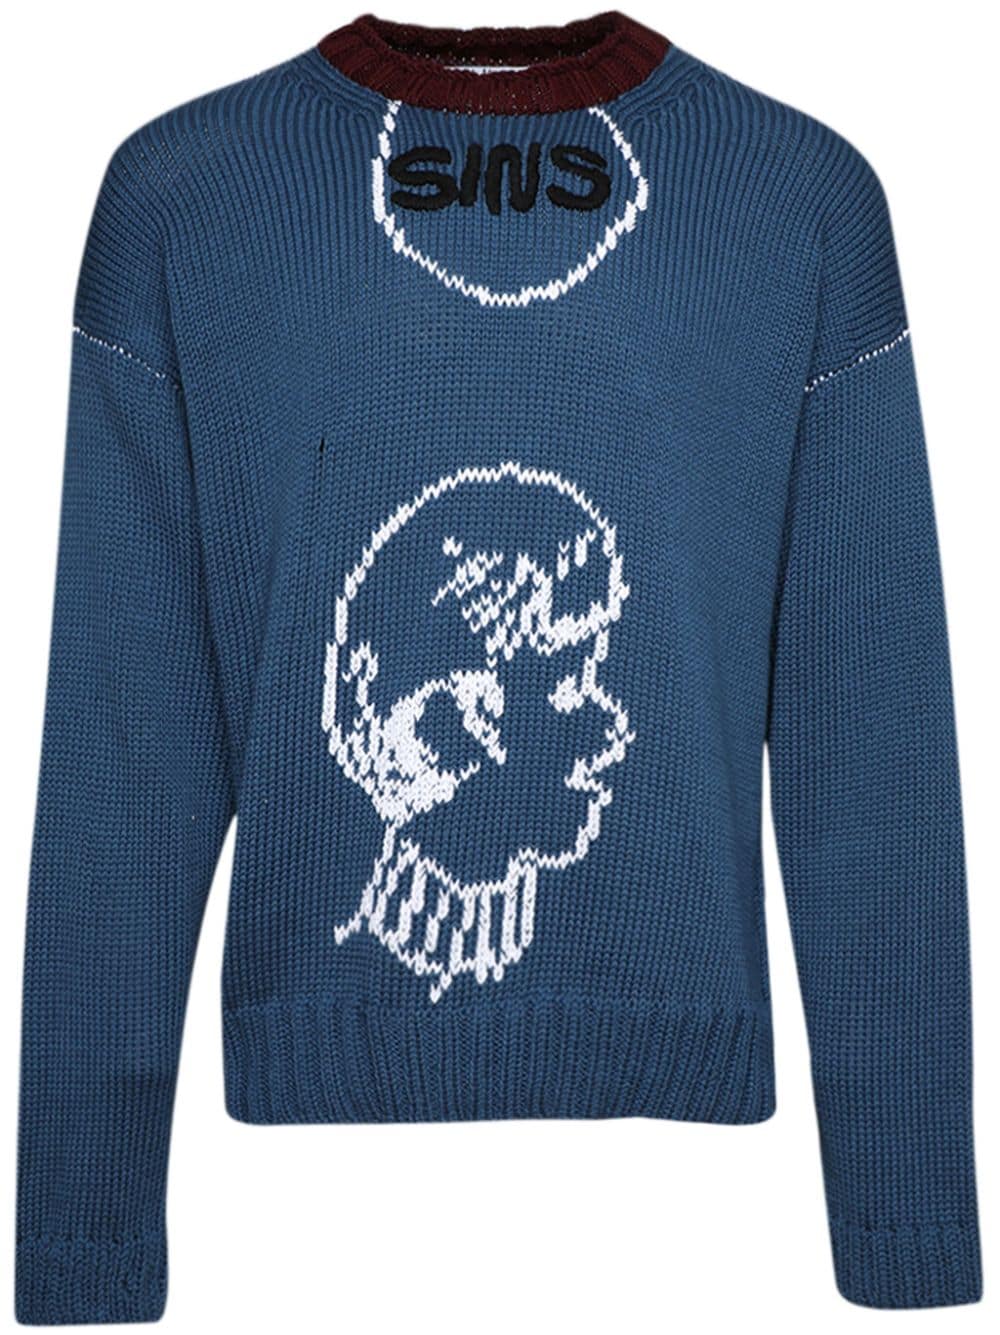 Paly intarsia-knit cotton jumper - Blue